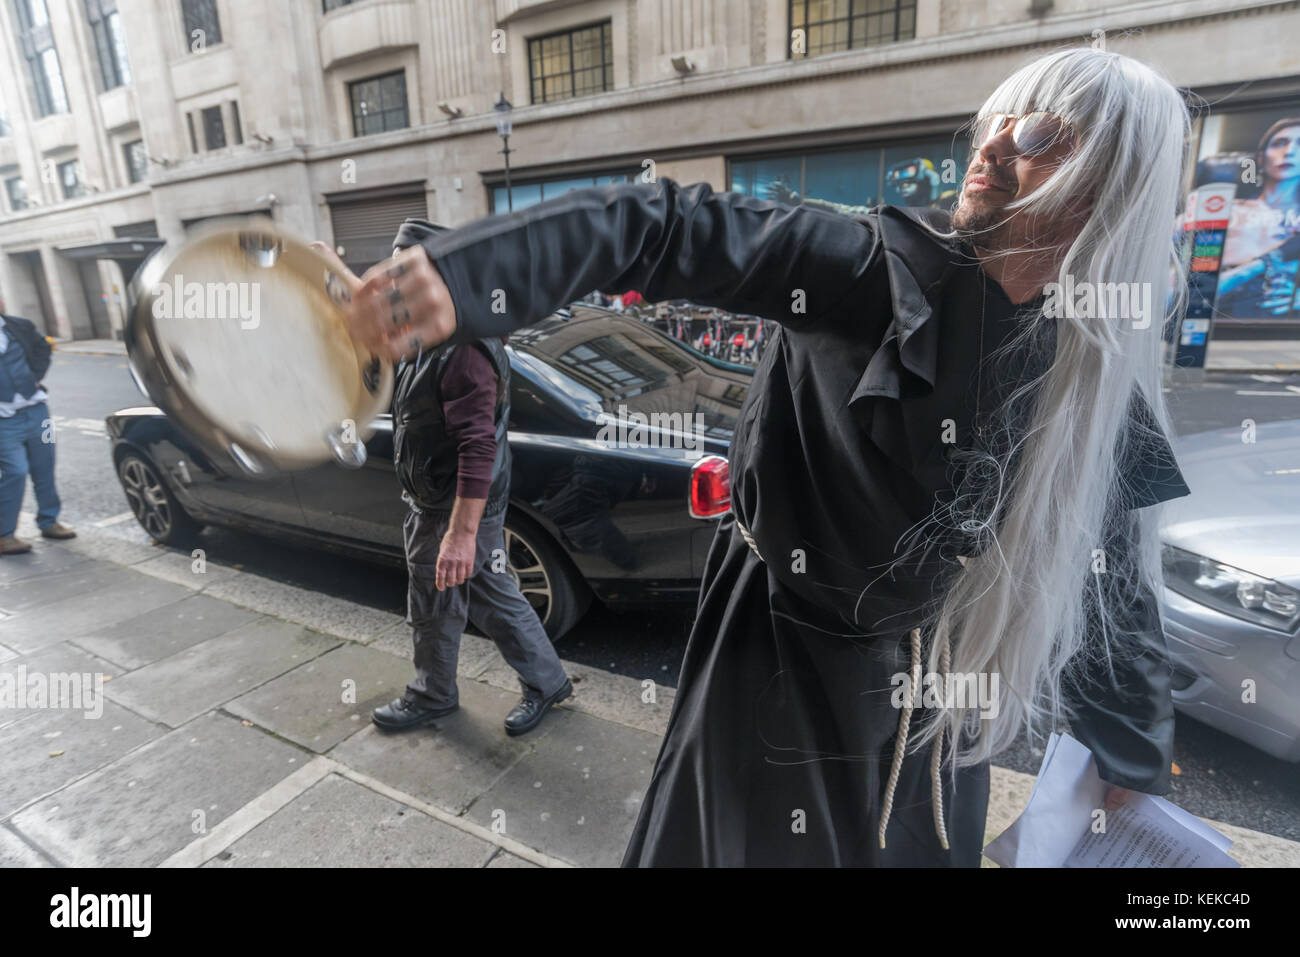 London, UK. October 21st 2017. Celebrating the 50th anniversary of the Yippee levitation of the Pentagon during anti-Vietnam War protests, Class War's Ian Bone, shaman Jimmy Kunt (aka Adam Clifford) and supporters went to Northcliffe House to levitate the Daily Mail. Security staff there reacted angrily to Class War calling out the demon of Paul Dacre and their attempt to raise the building by over 70 metres, perhaps fearing it might damage the Rolls-Royce parked outside, but the levitation ceremony went ahead despite considerable interference. Peter Marshall/Alamy Live News Stock Photo